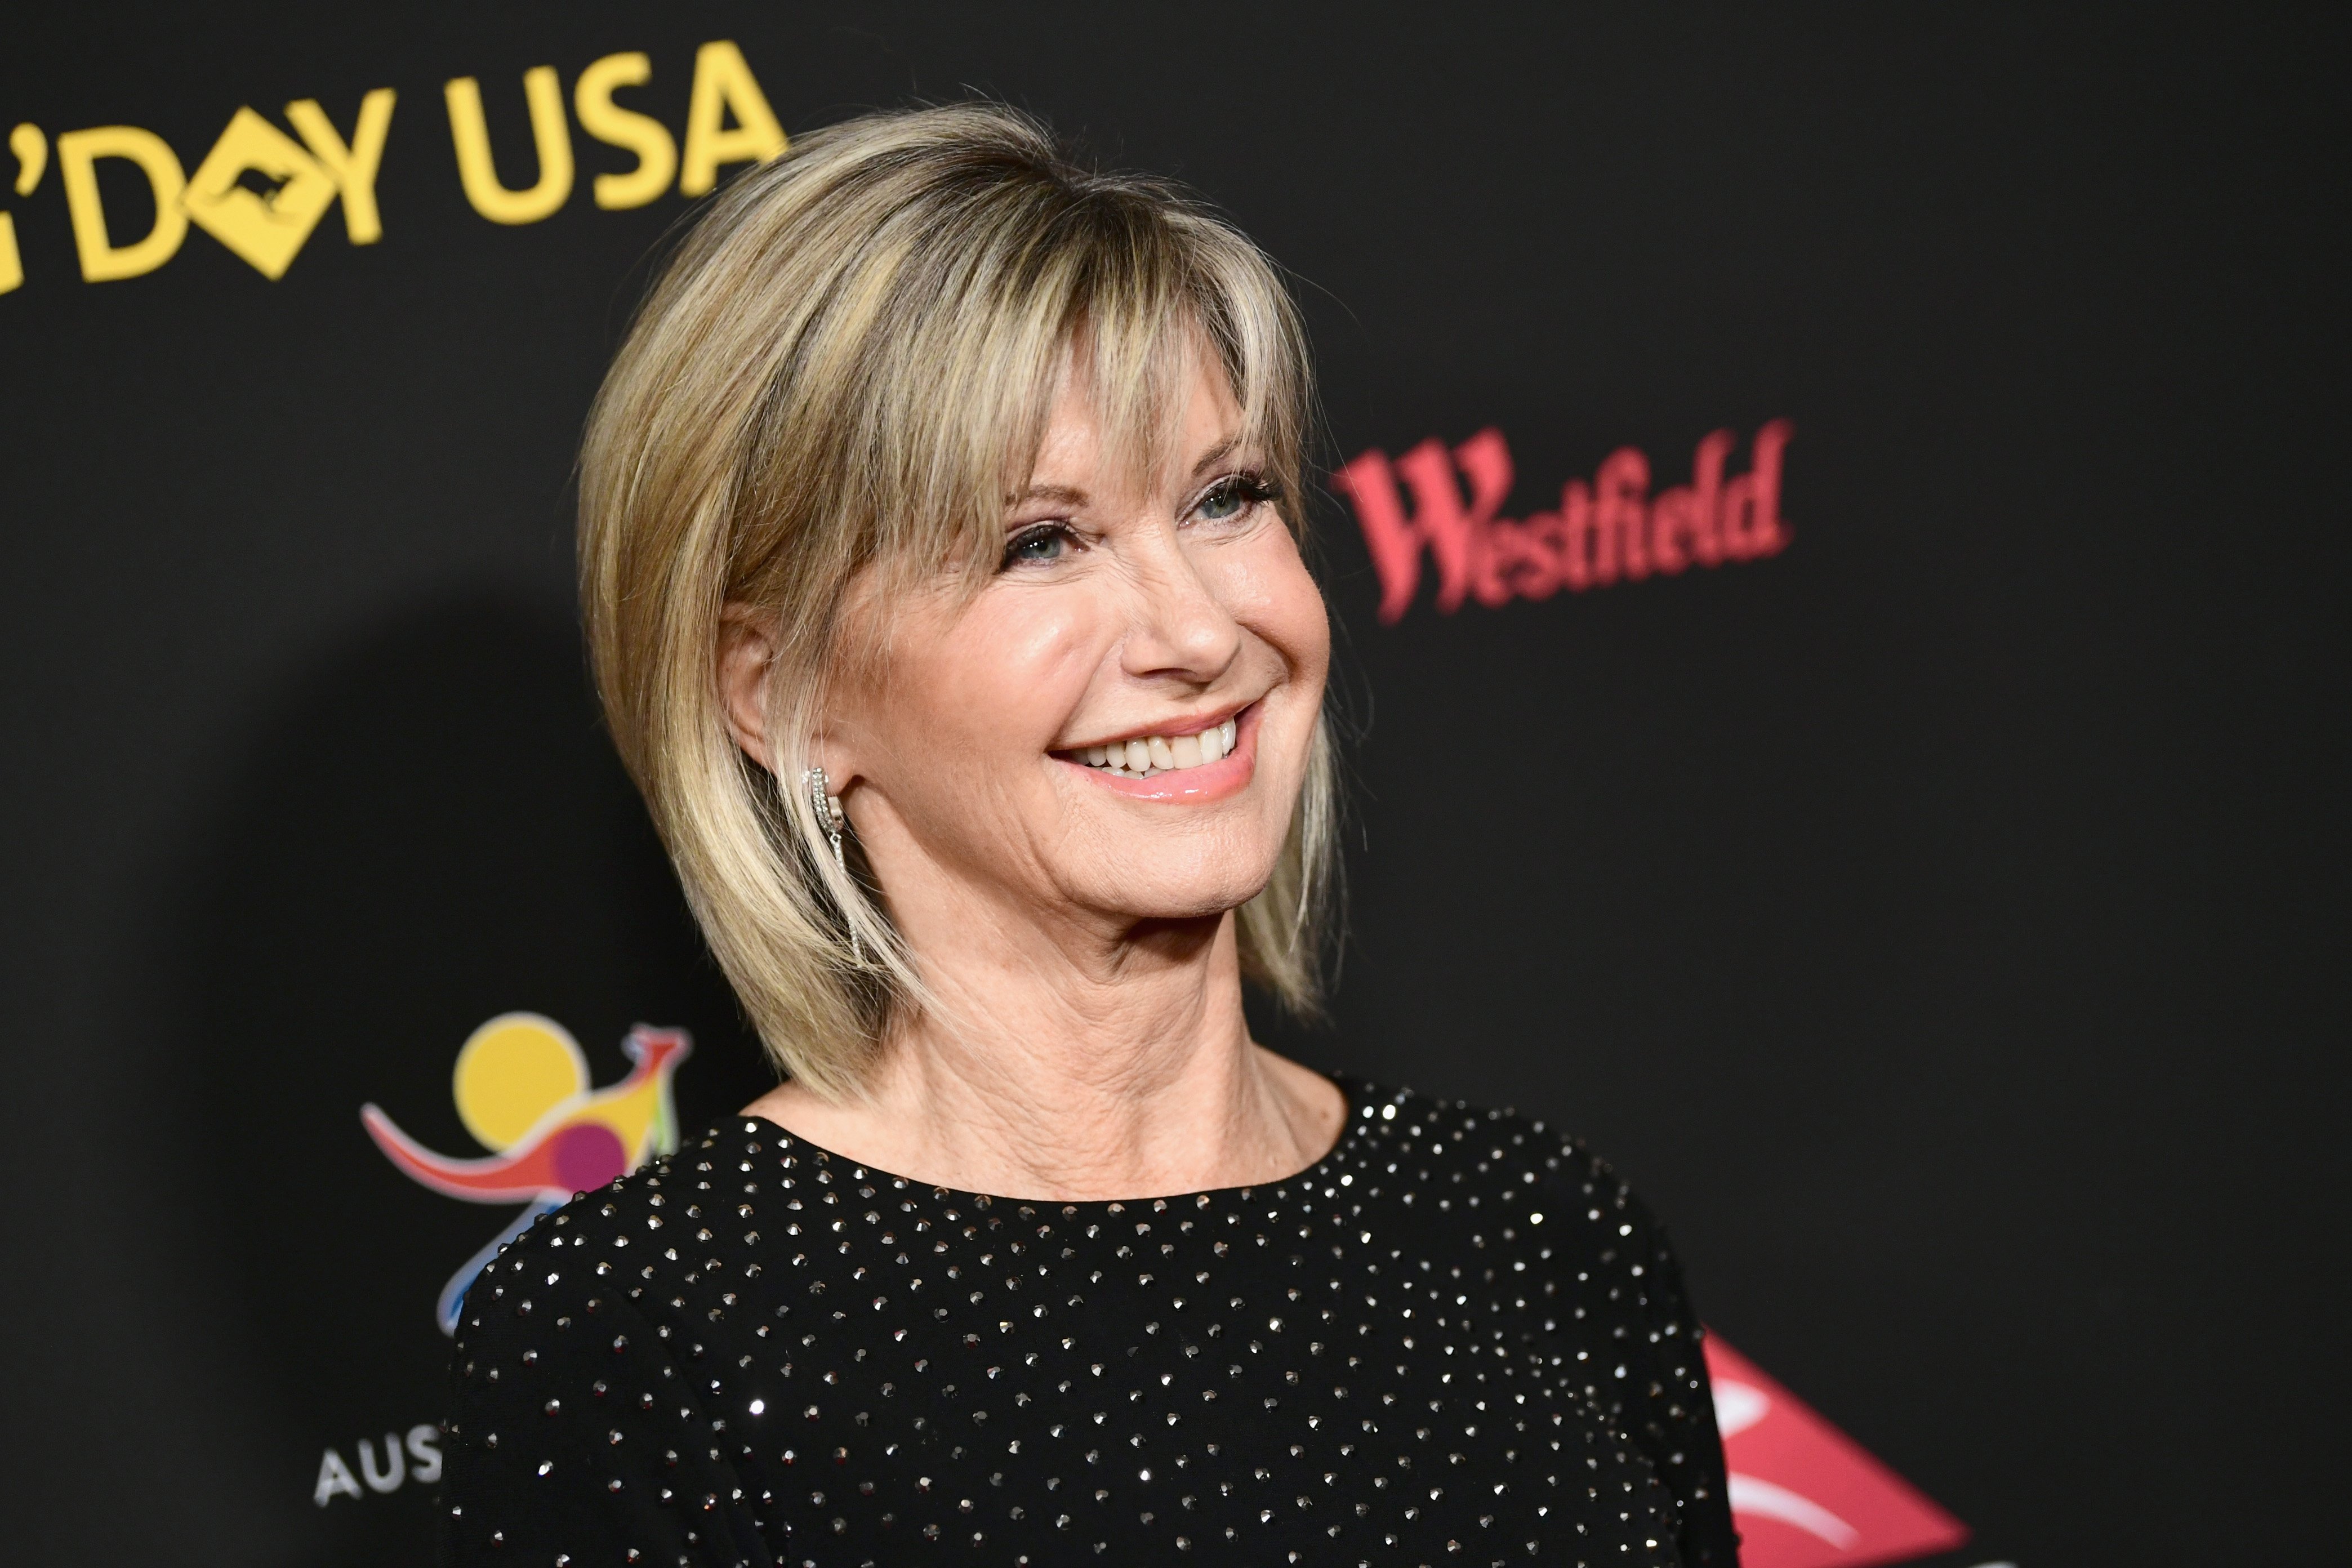 Olivia Newton-John at the 2018 G'Day USA Los Angeles Black Tie Gala on January 27, 2018 | Photo: GettyImages